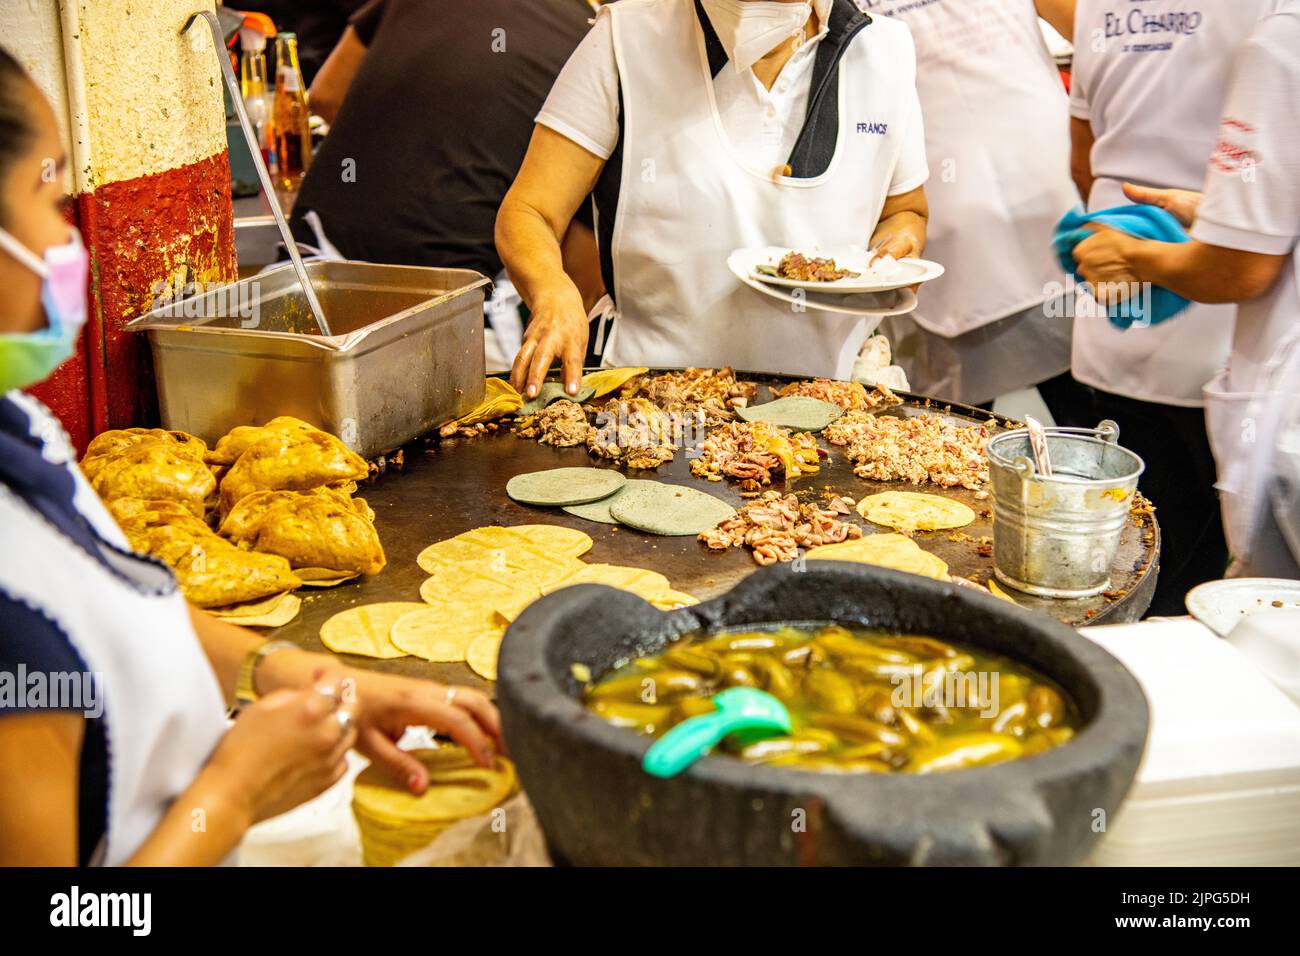 Mexican people cooking and preparing tacos at Coyoacan Market in Mexico City, Mexico Stock Photo